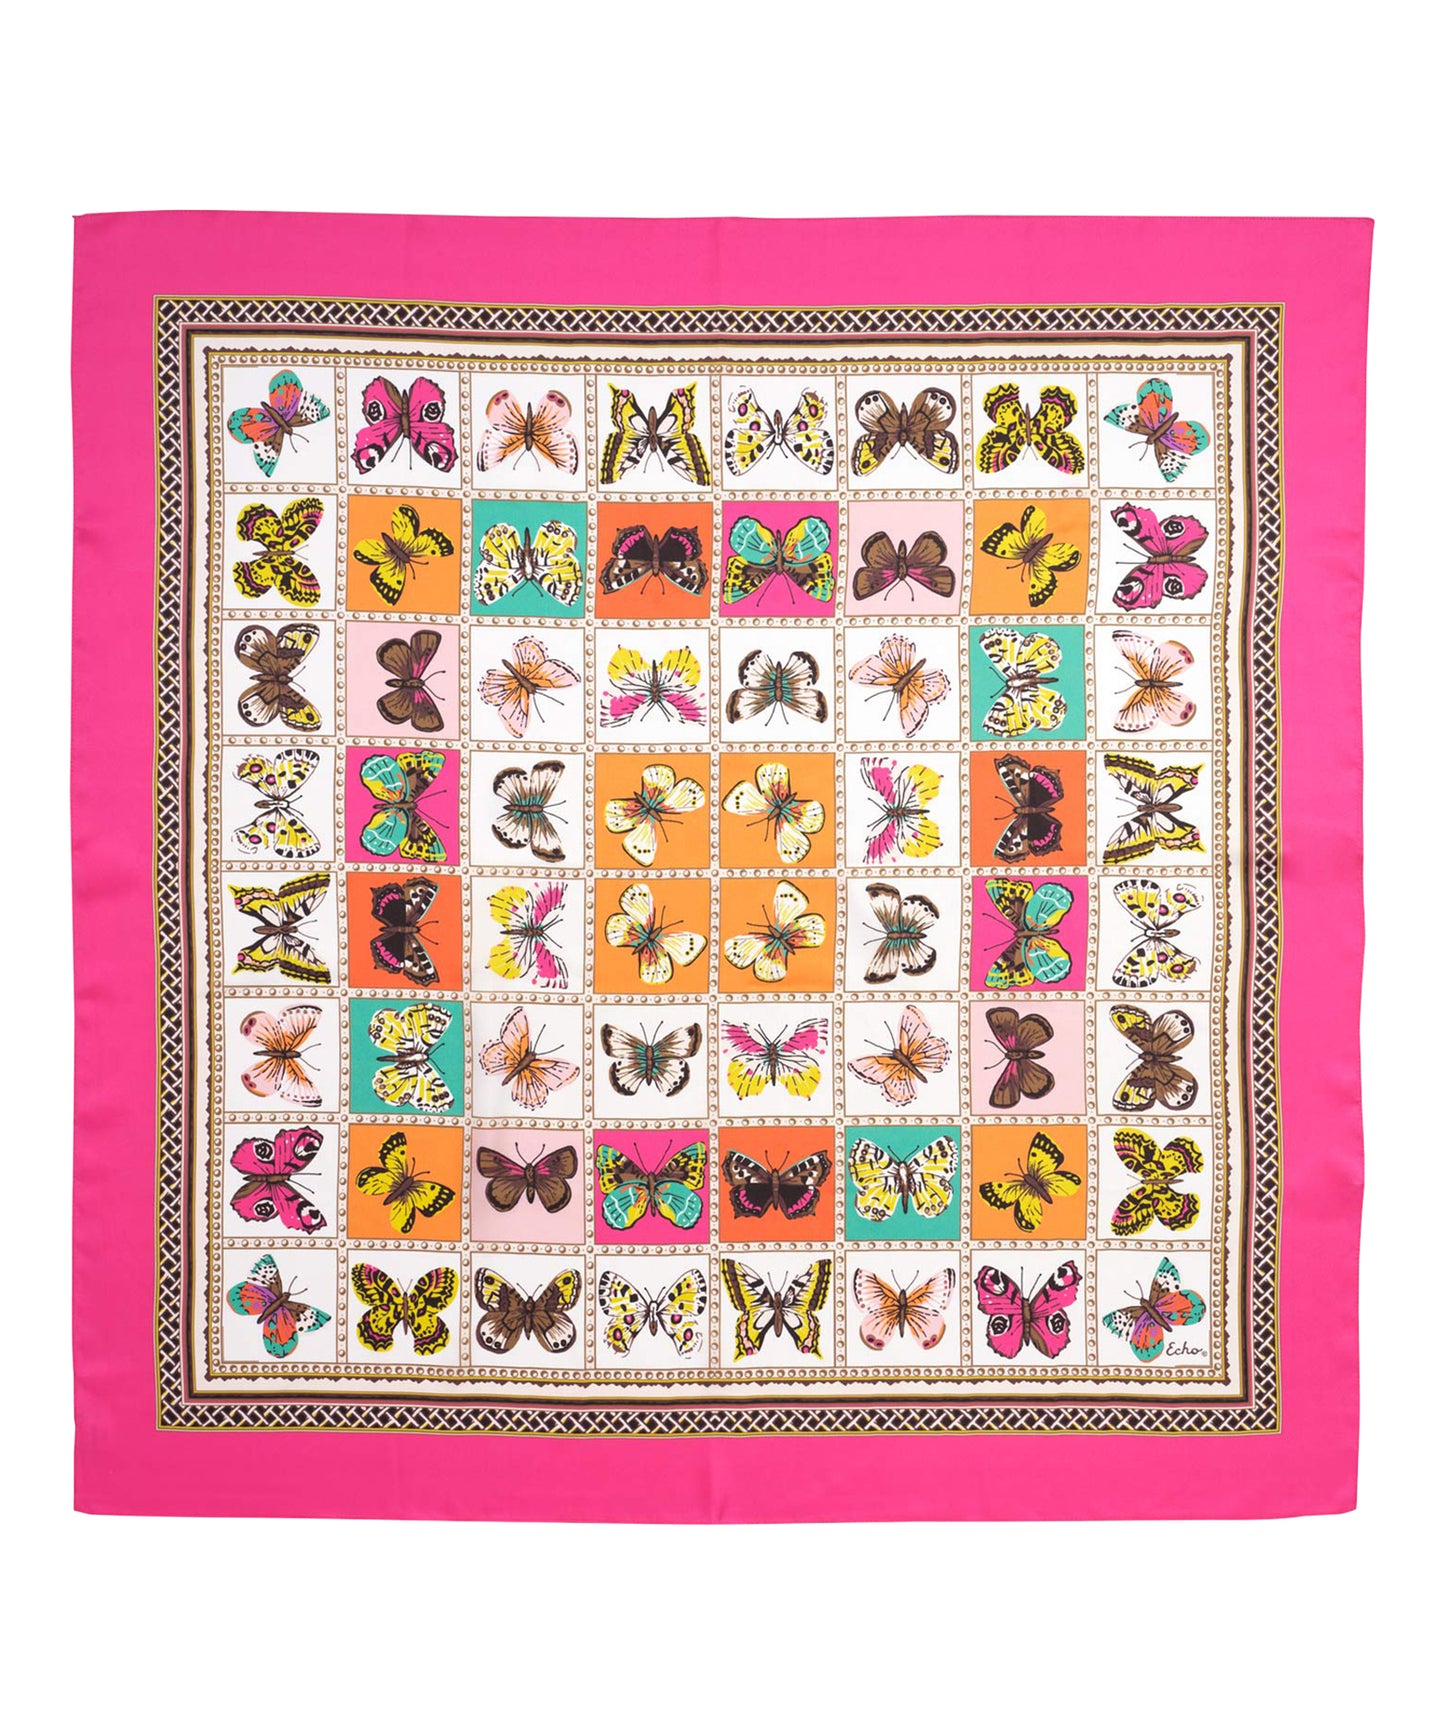 Butterfly Display Silk Square Scarf in color hibiscus